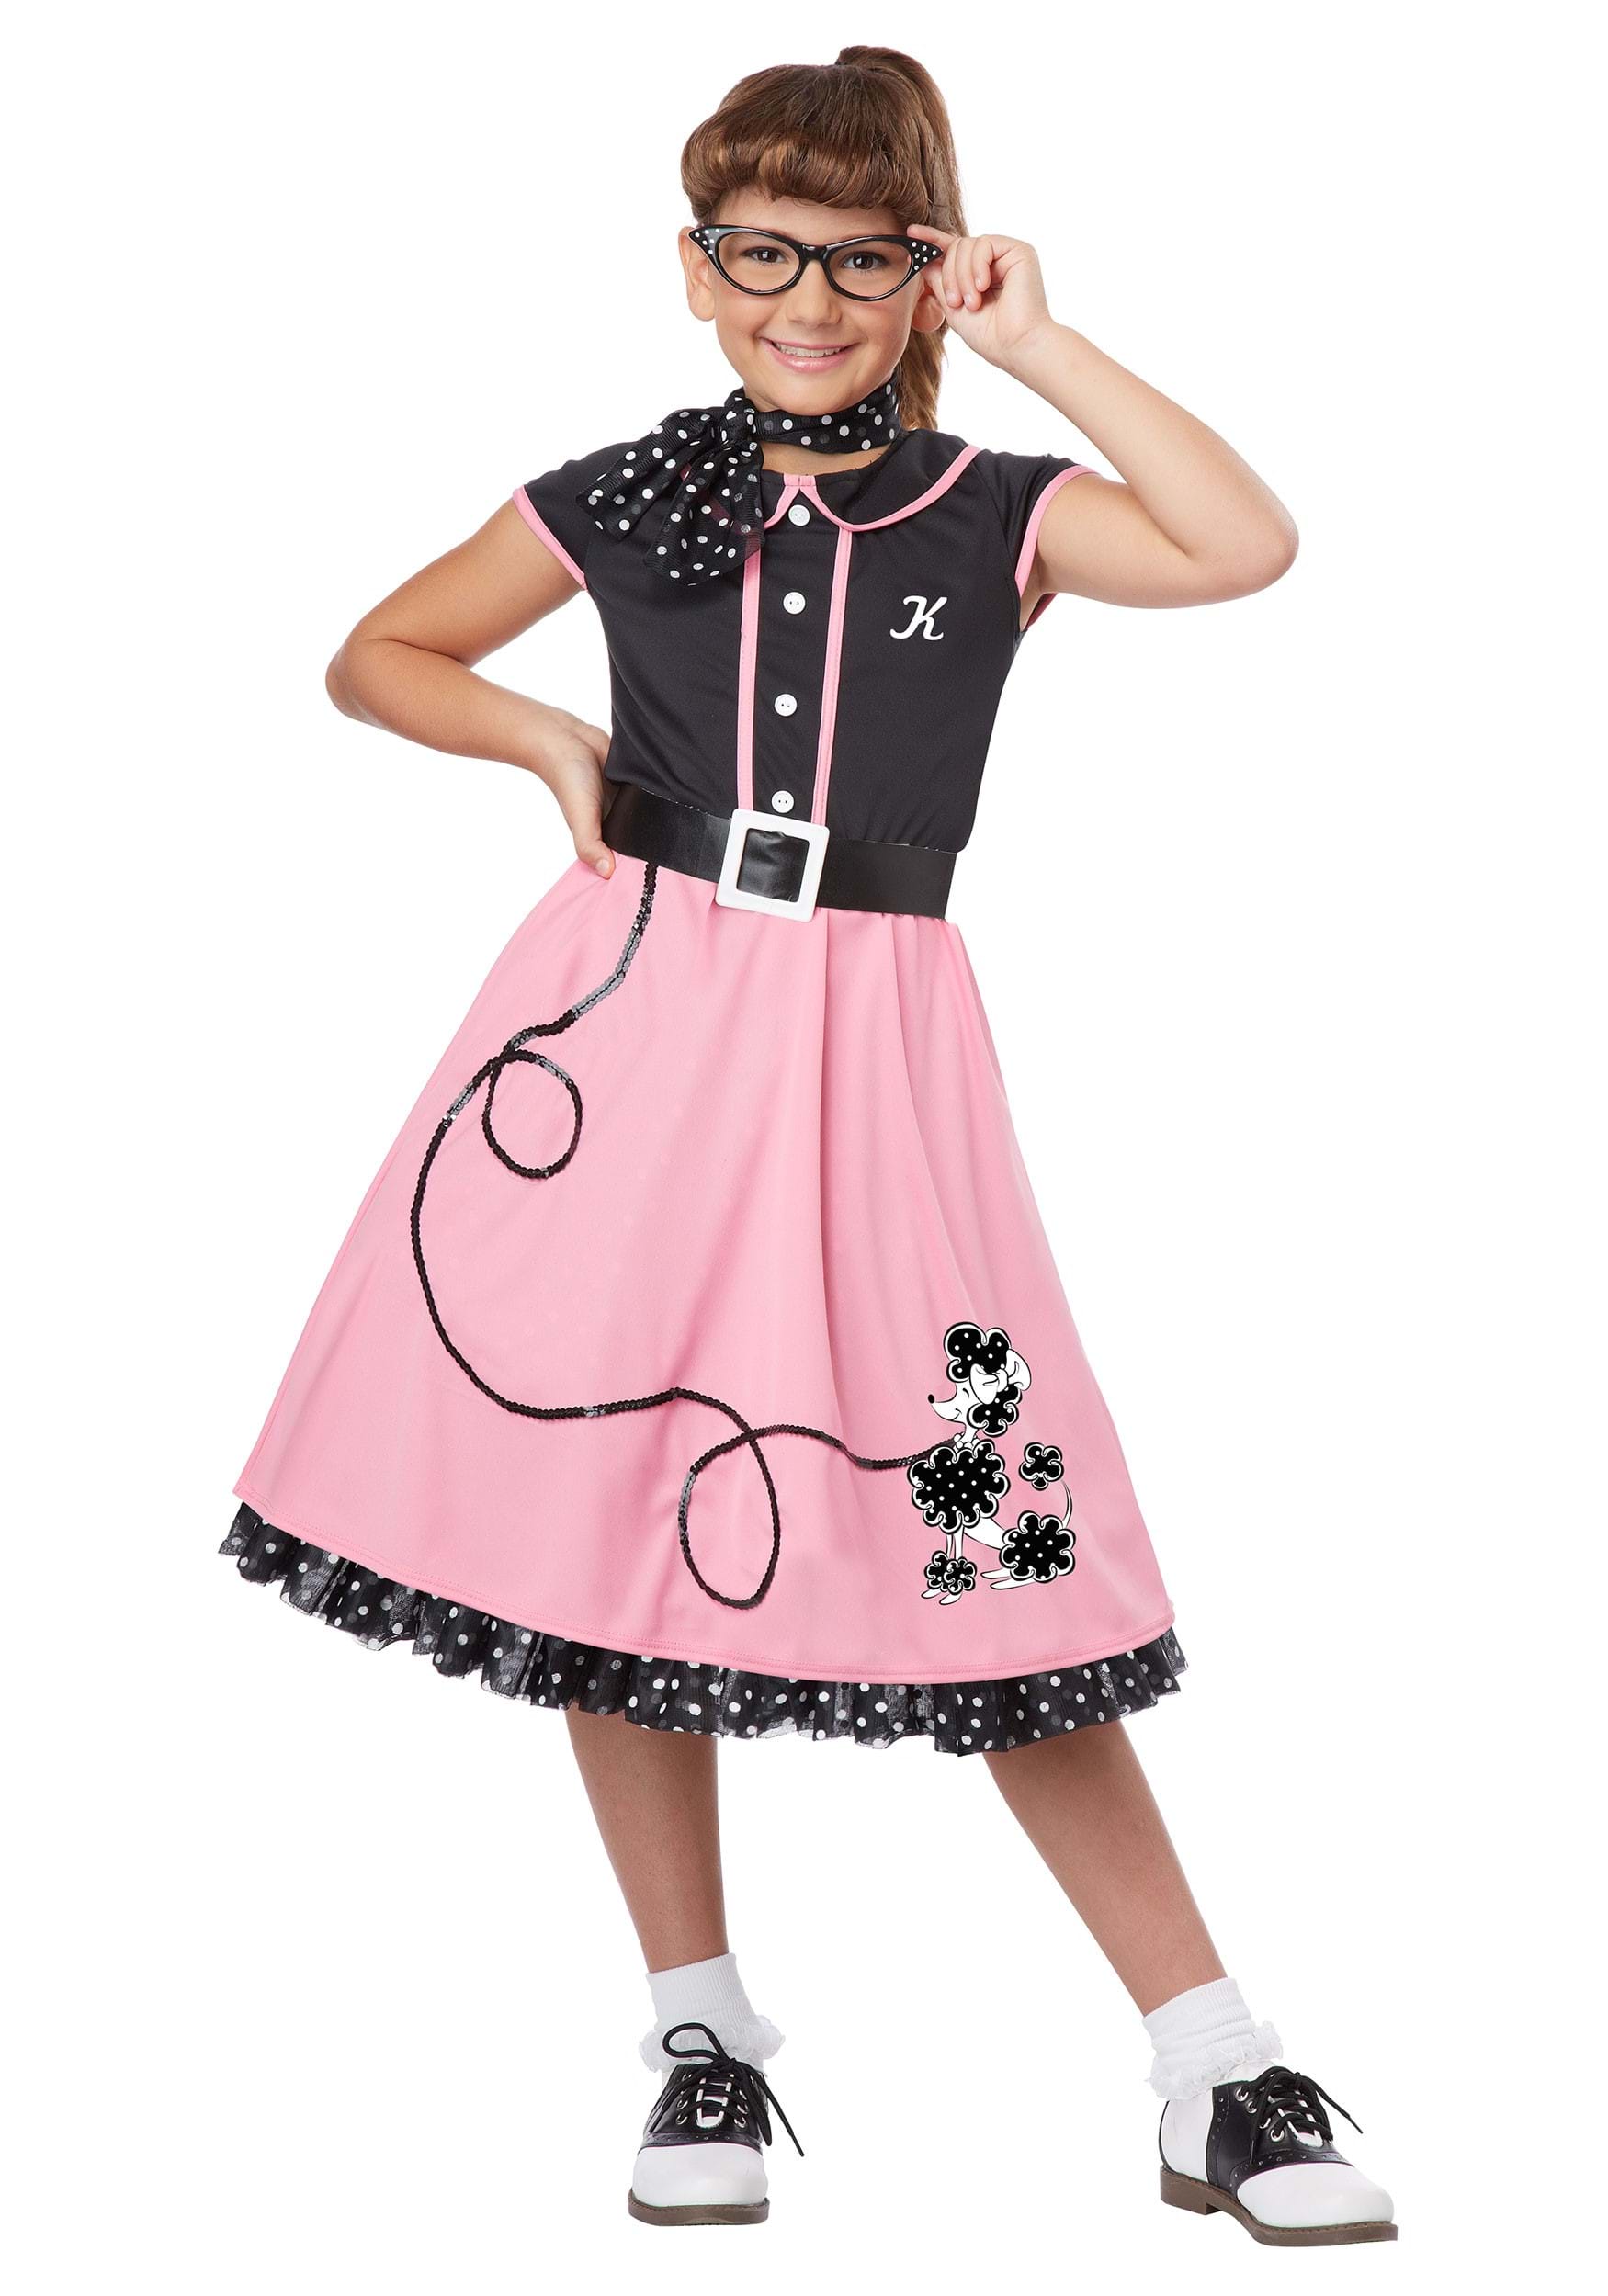 Photos - Fancy Dress California Costume Collection Pink 50s Sweetheart Girl's Costume Black/ 